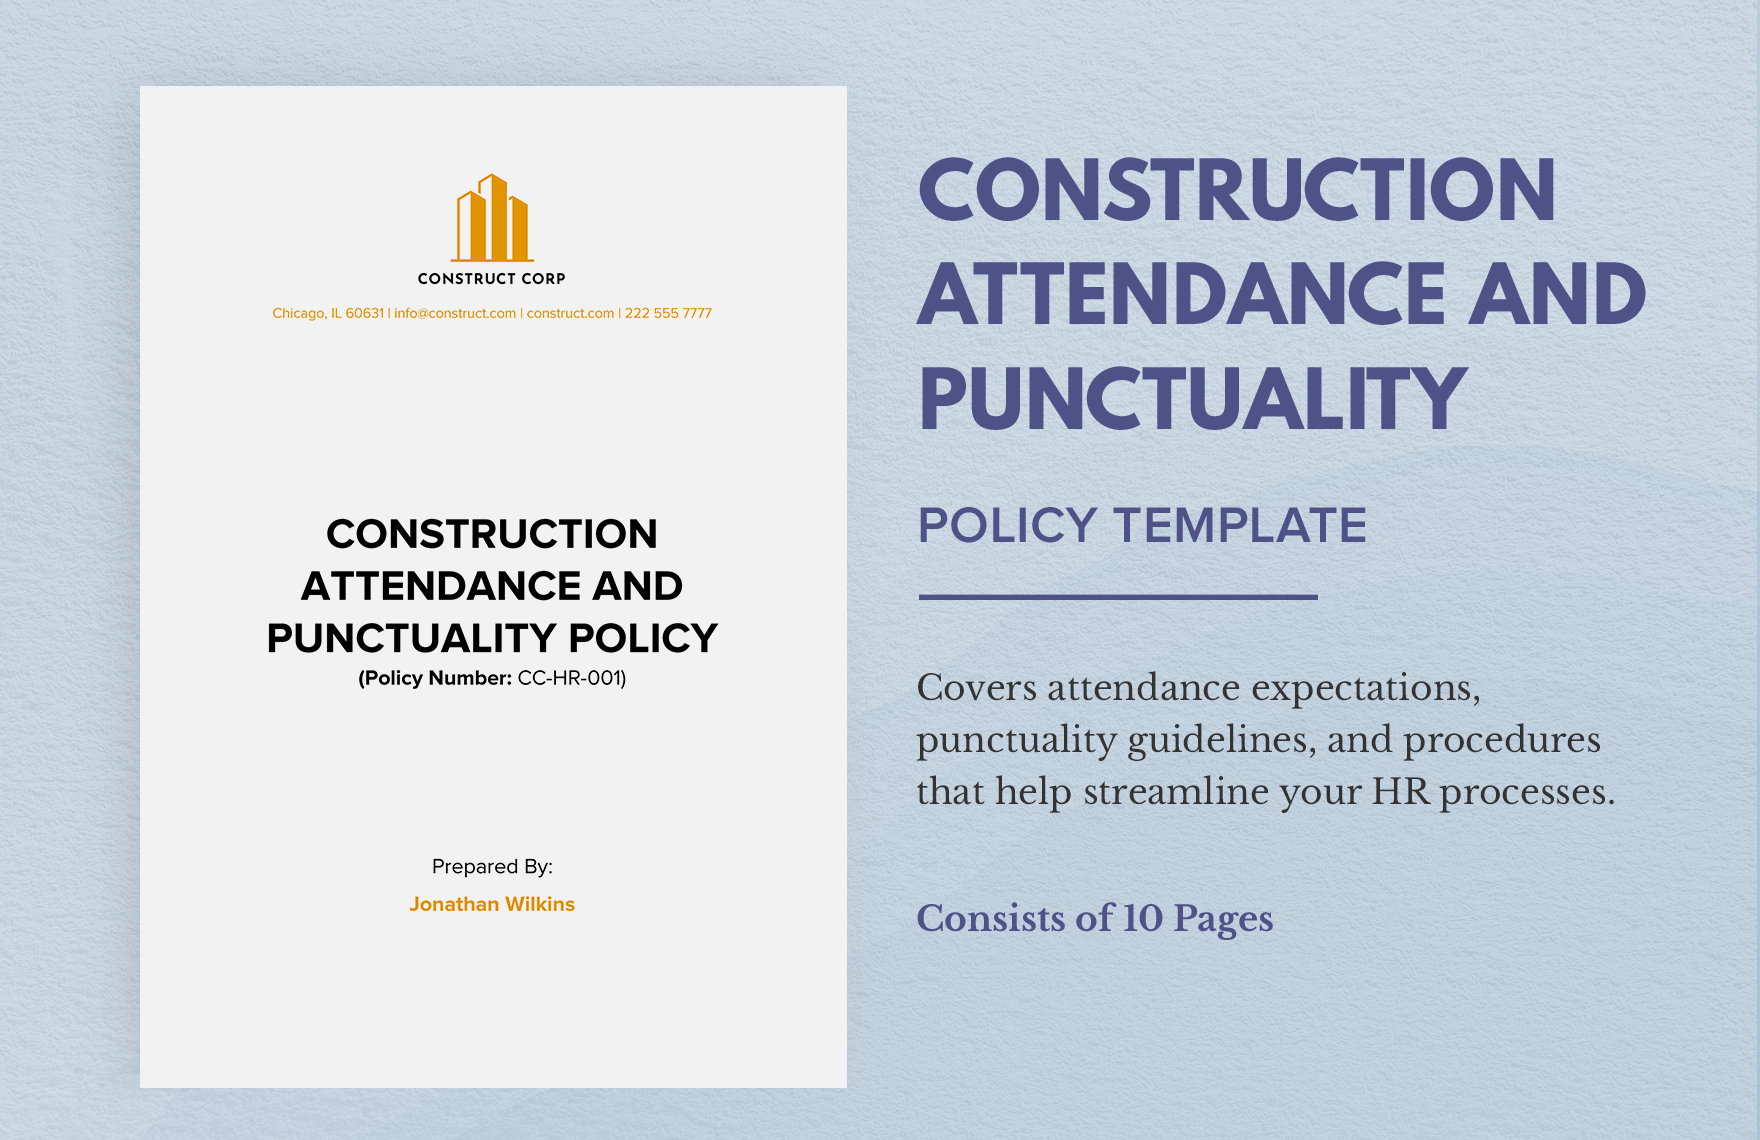 Construction Attendance and Punctuality Policy Template in Word, Google Docs